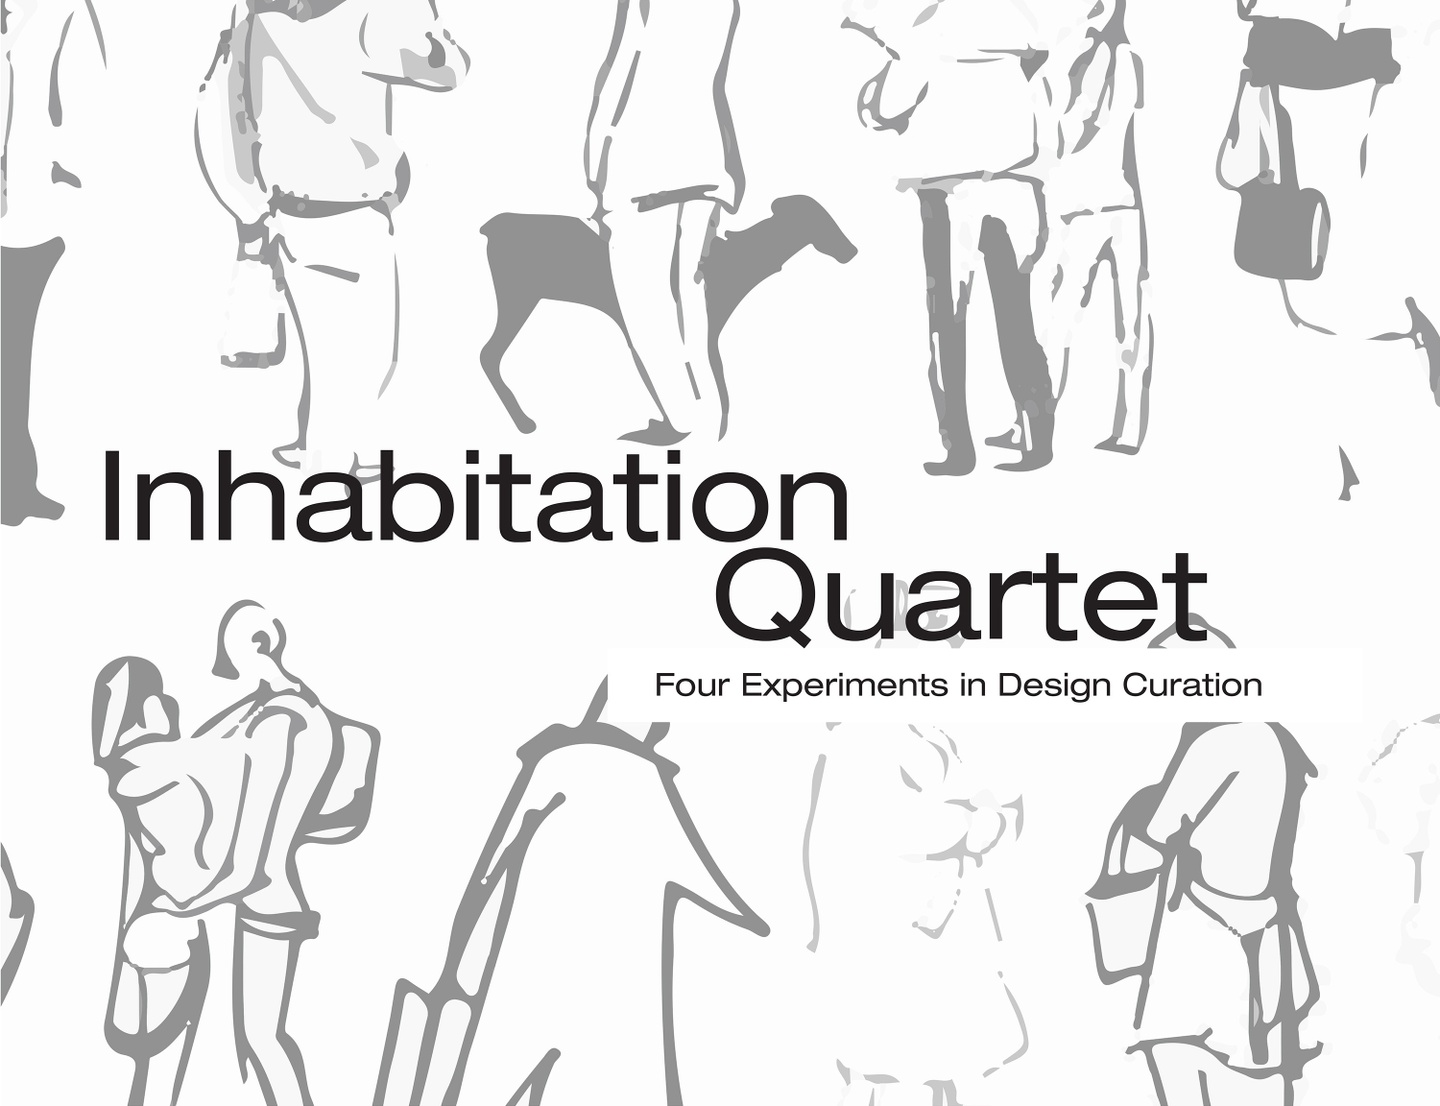 Poster with the title Inhabitation Quartet: Four Experiments in Design Curation in black type, with gray drawings of roughly sketched people in the background.